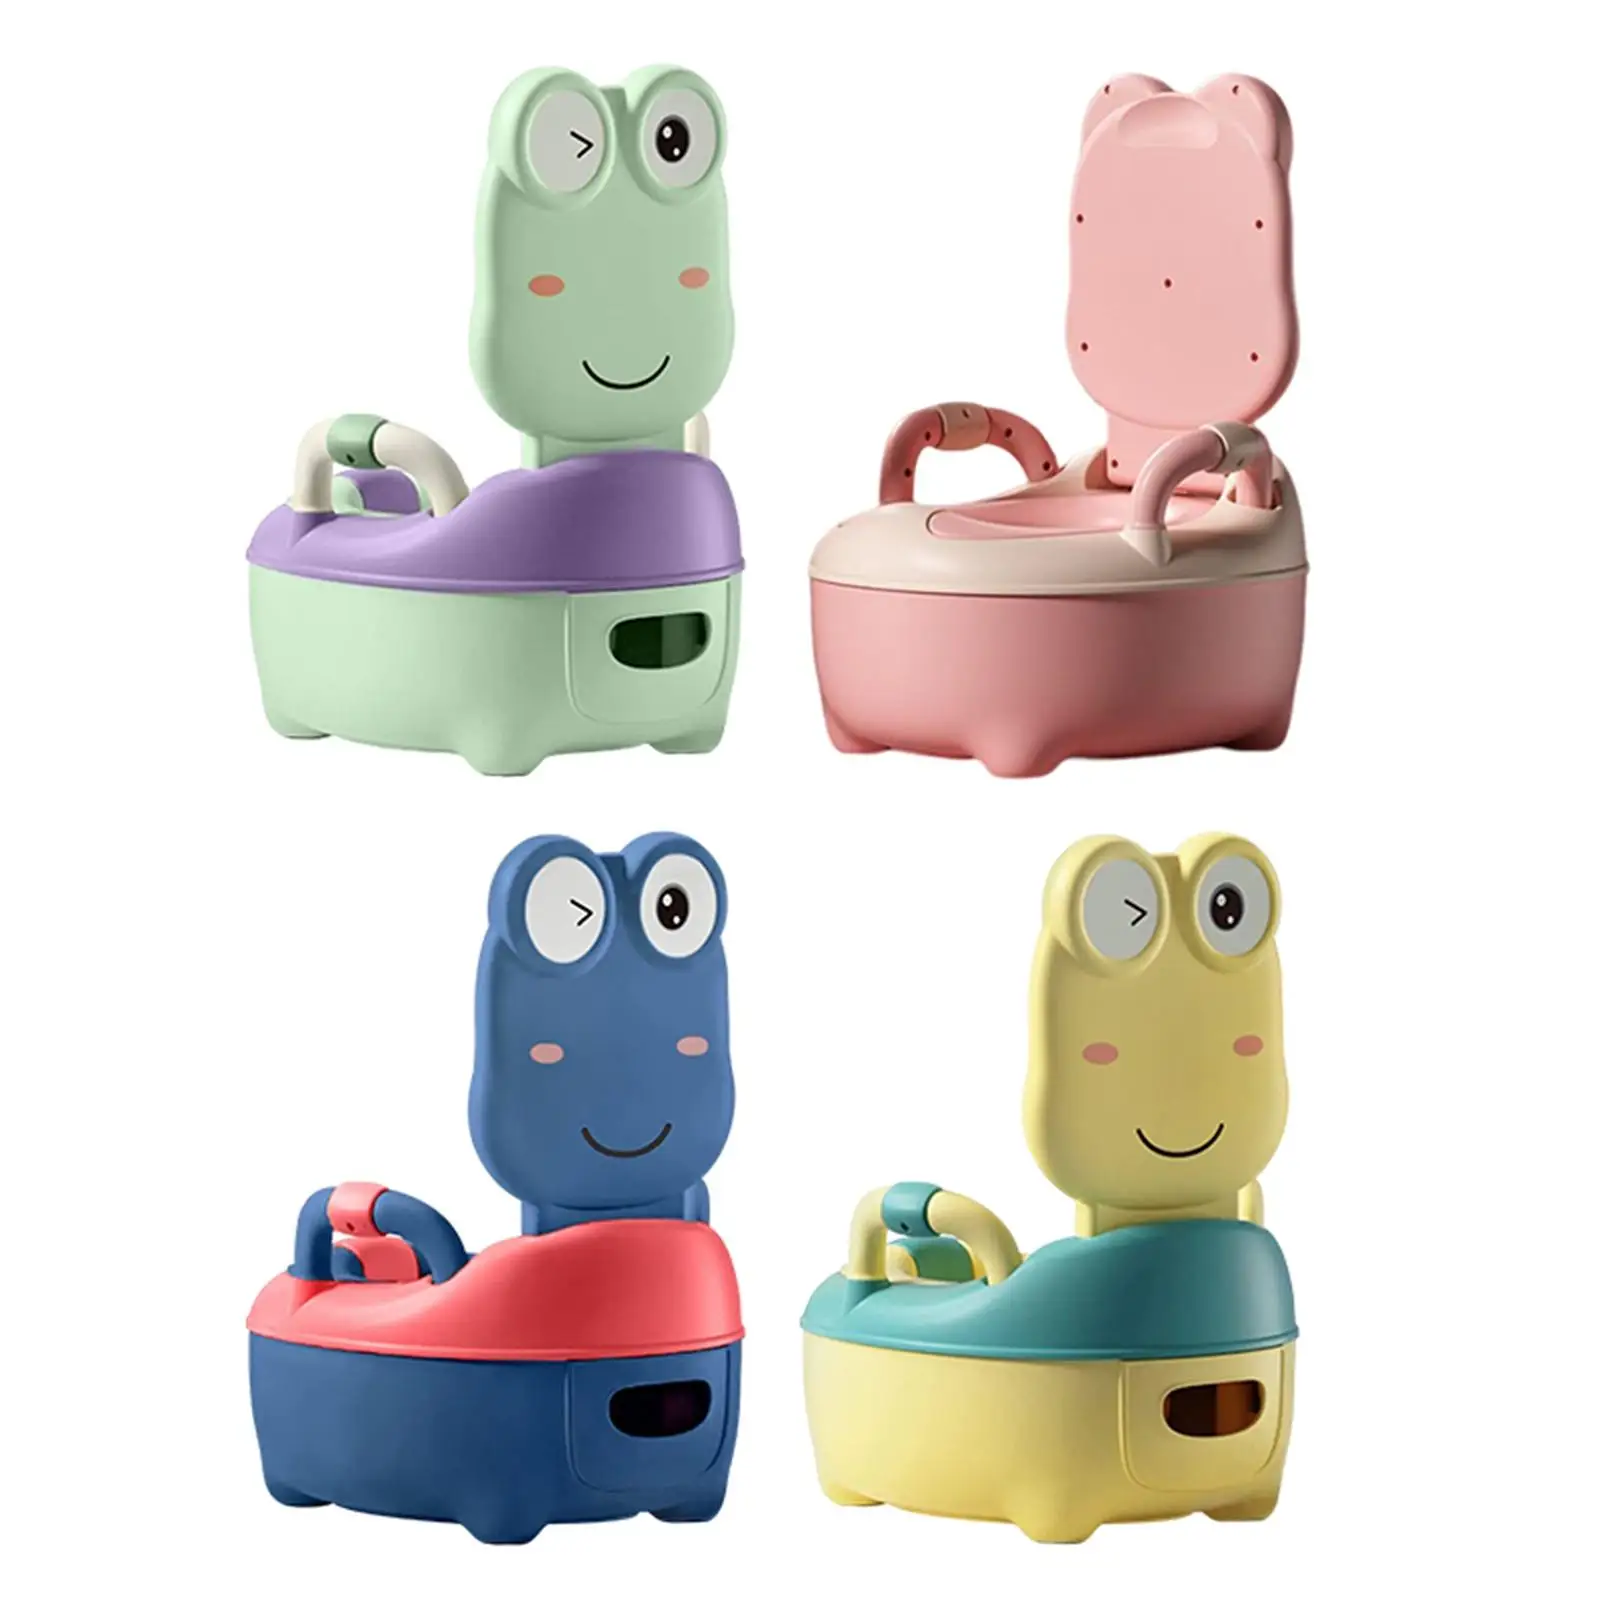 Baby Toilet Seat Potty Stool Urinal Comfortable Removable Container for Kids Toddler